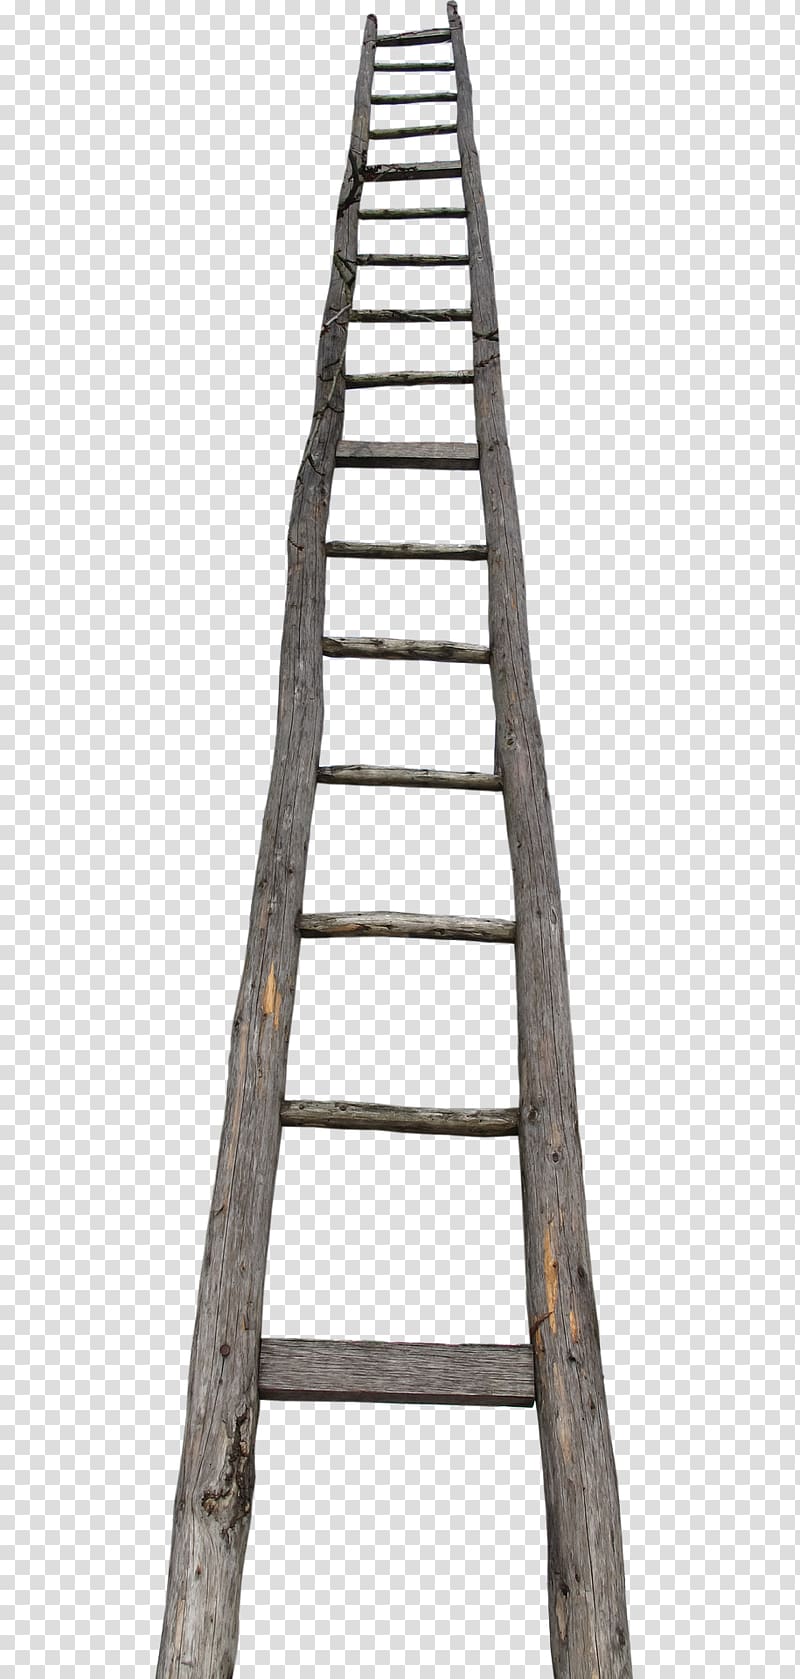 Best Choice Products SKY528 Multi-Purpose Folding Ladder Paint Aluminium alloy Roth IRA, ladder transparent background PNG clipart